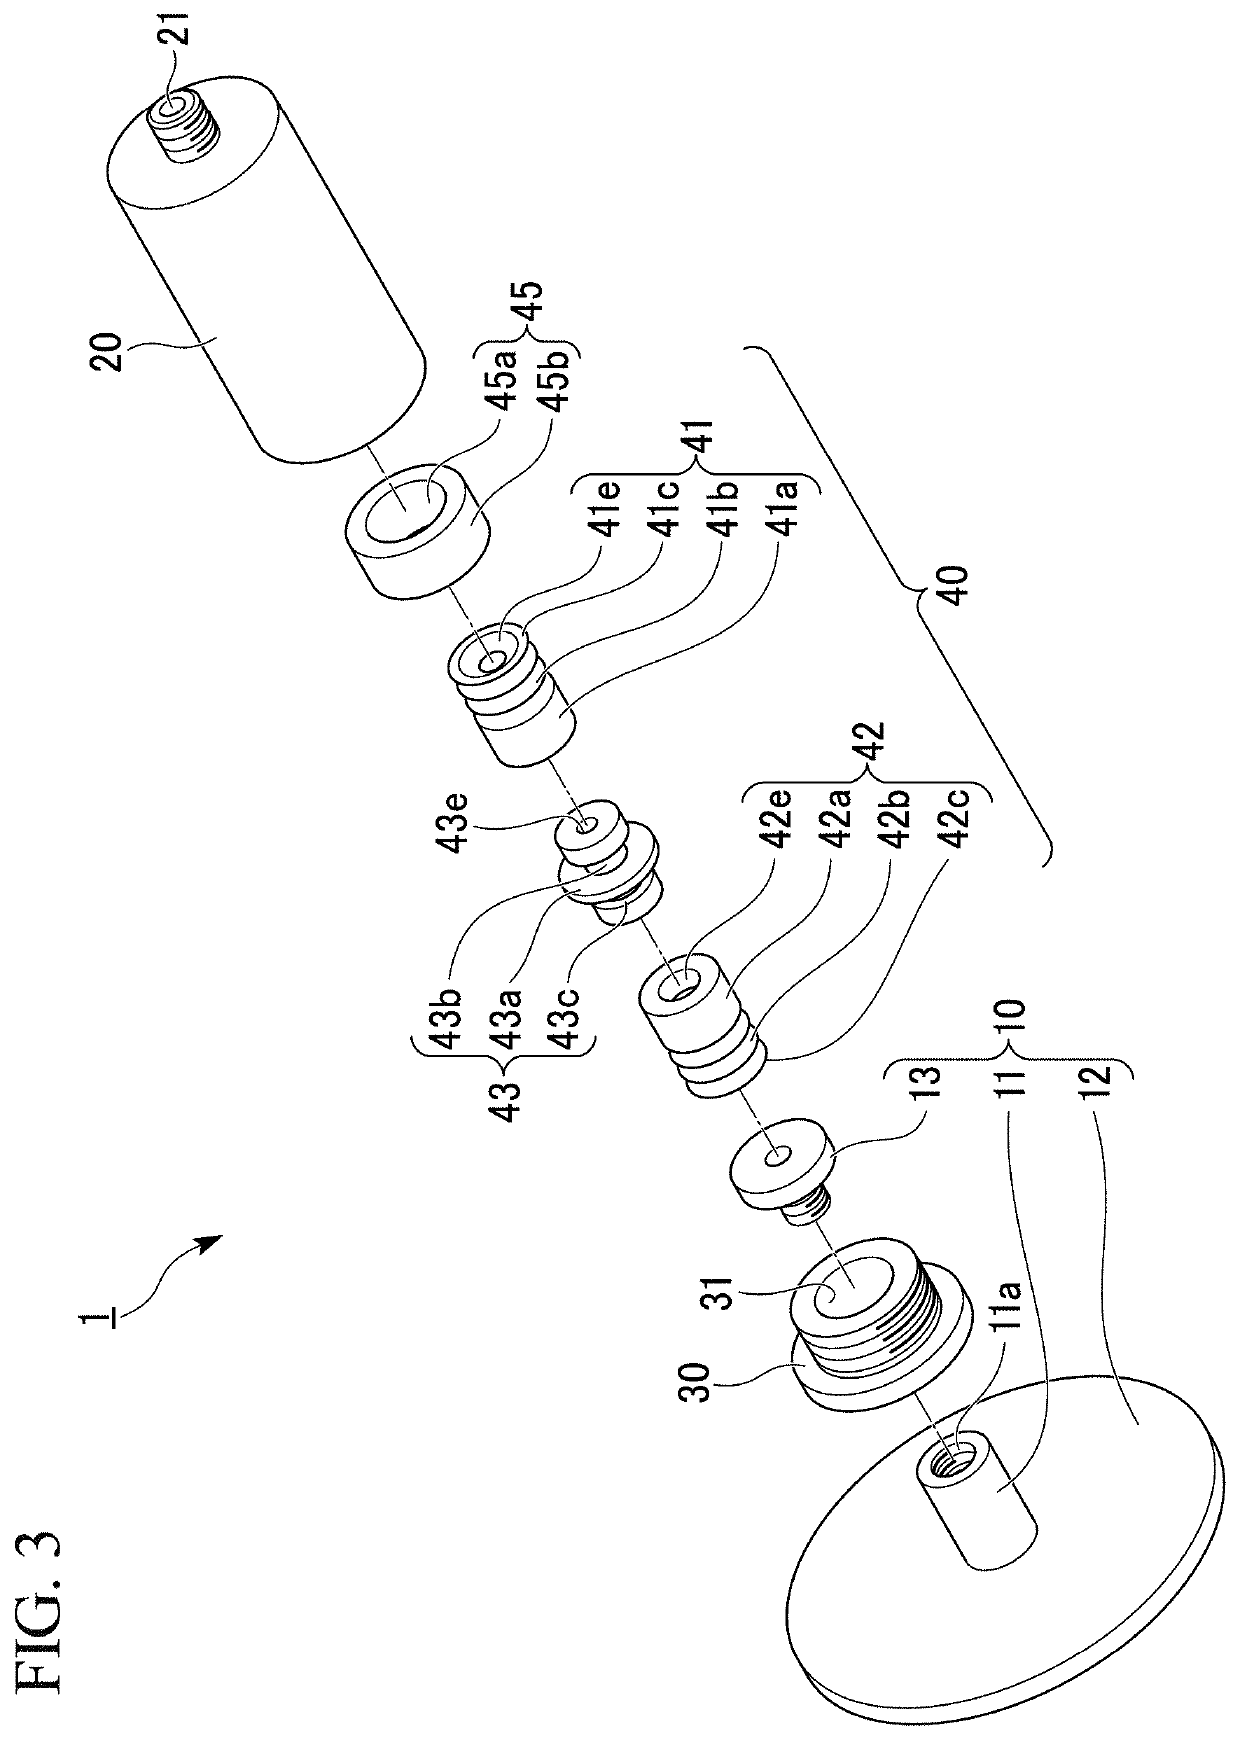 Holding nozzle, holding head and transportation apparatus